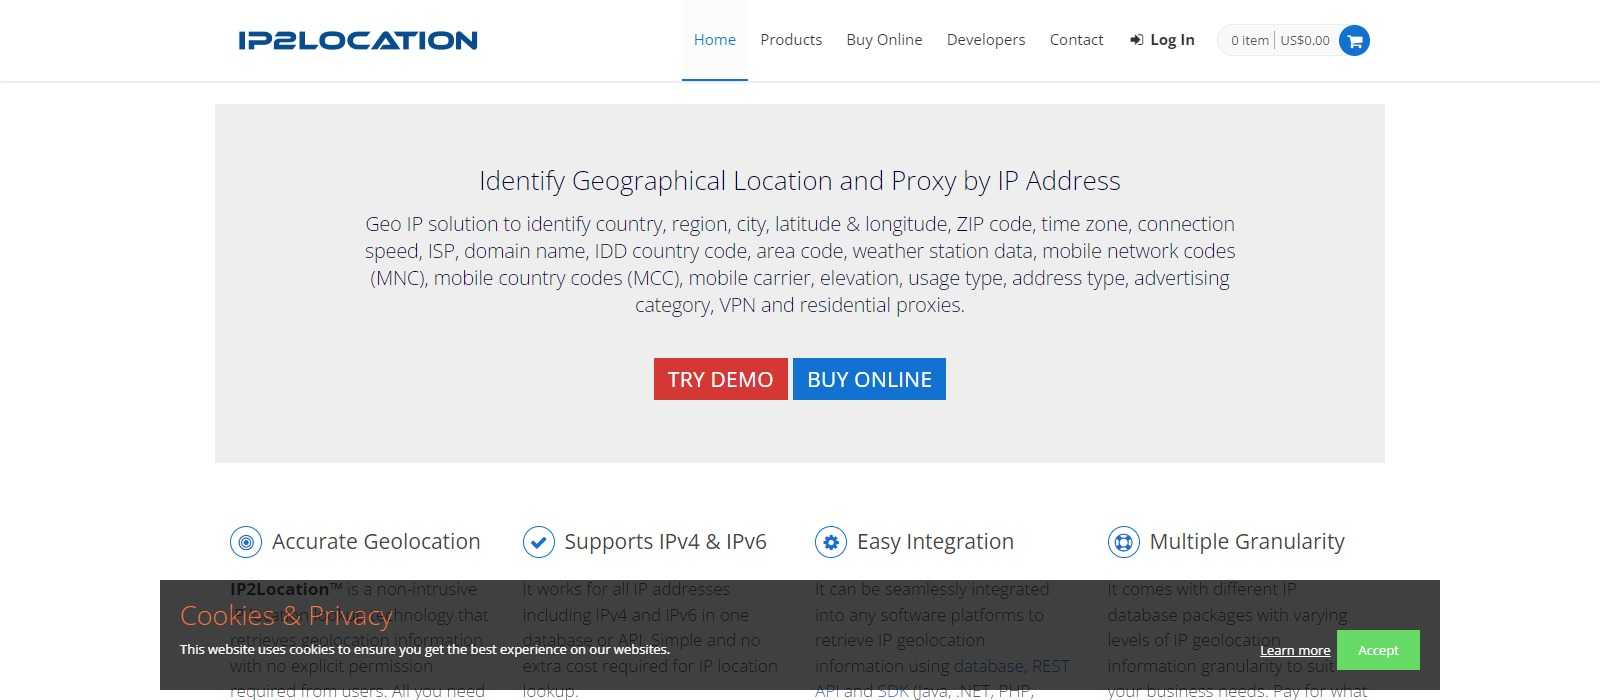 IP2Location Affiliate Program Review: Get Earn Up To 10% Recurring Commission on each sale